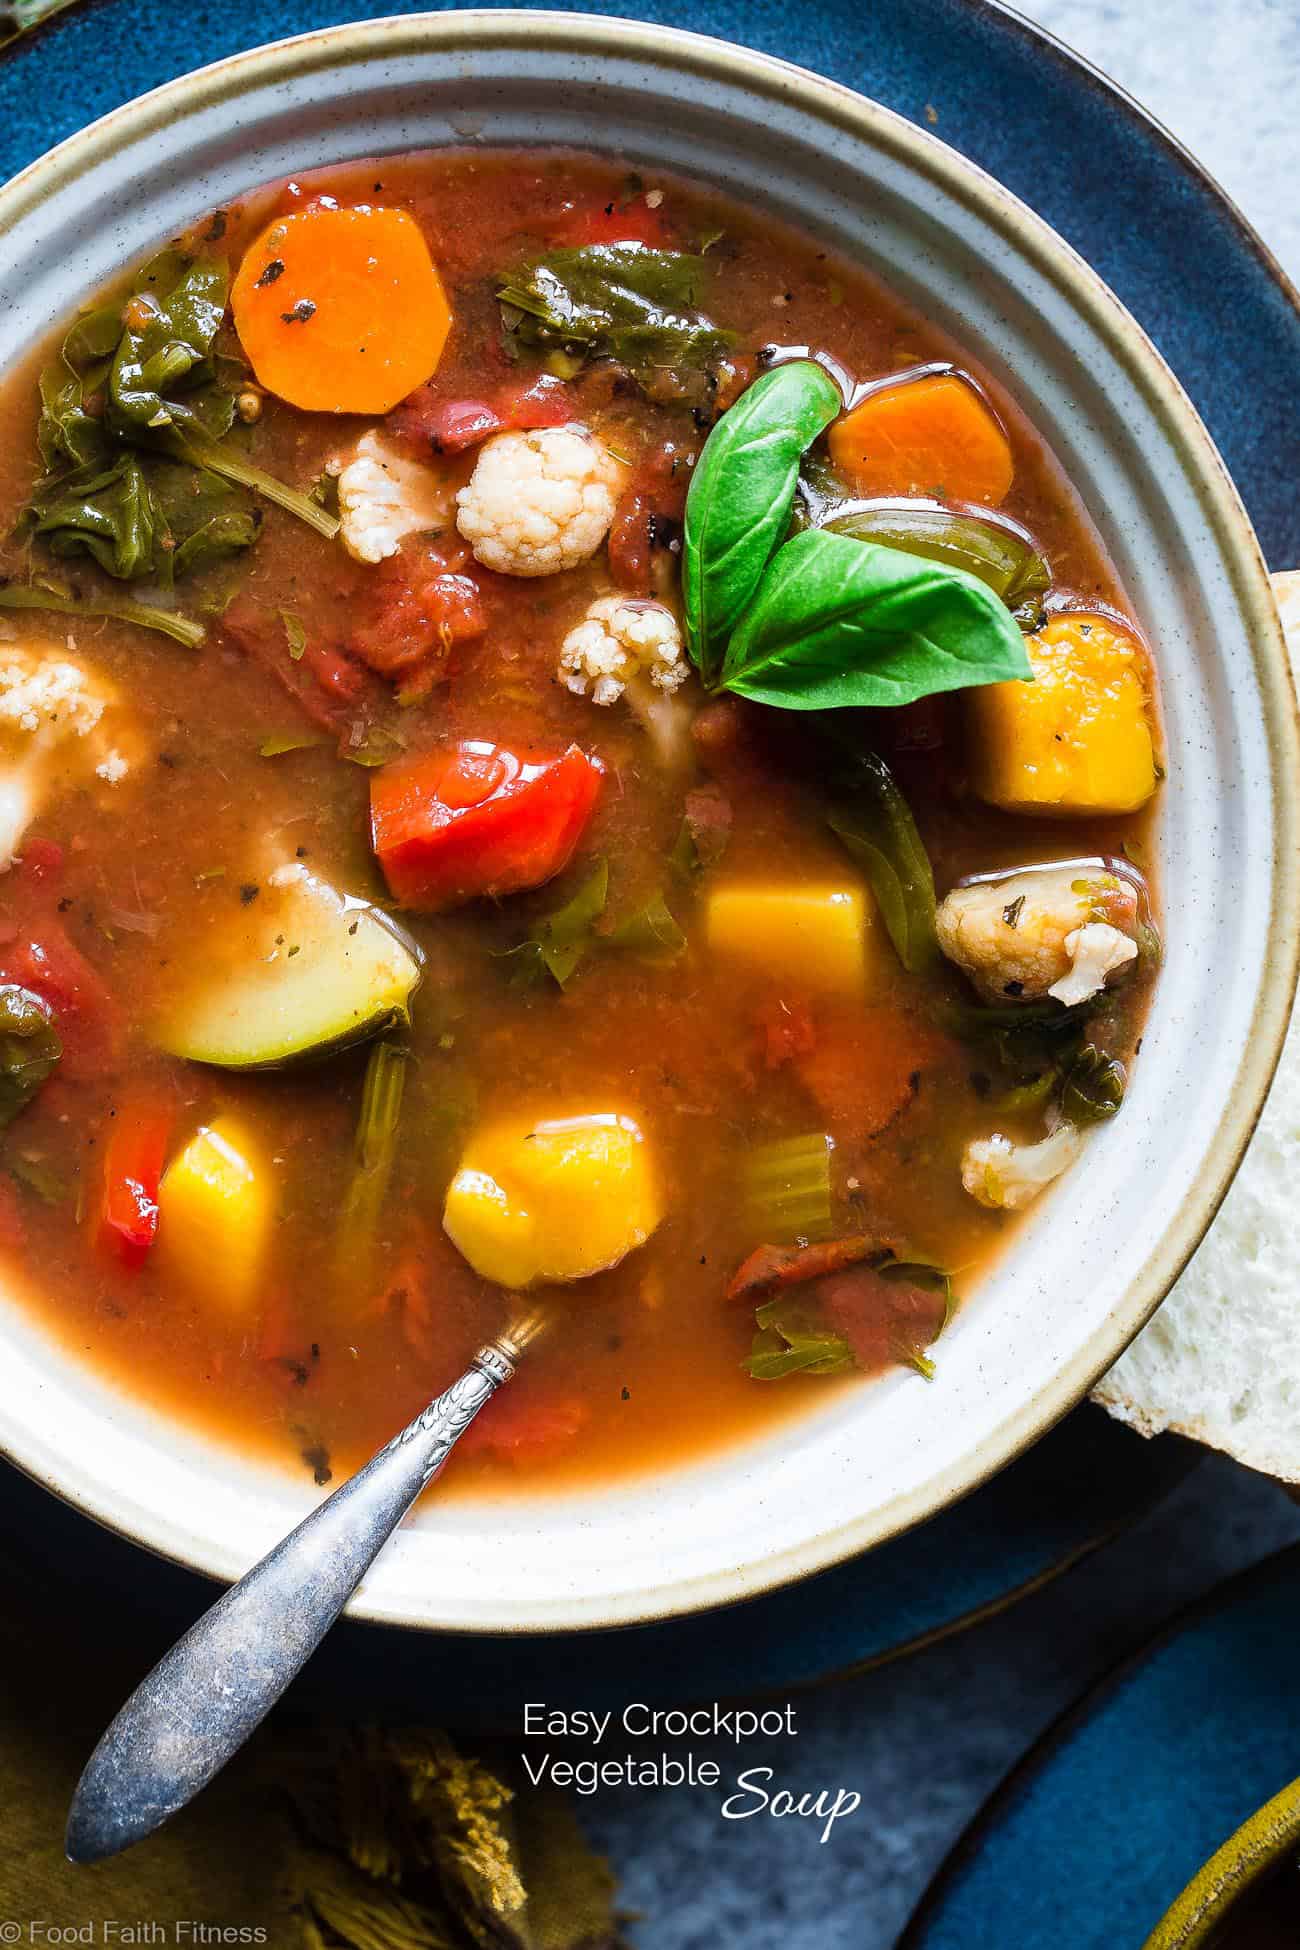 Easy Homemade Crockpot Vegetable Soup - Let the crockpot do the work for you with this simple soup that is a whole30, paleo and vegan dinner with only 1 SmartPoint and 85 calories! A family friendly dinner for busy weeknights that will please the pickiest of eaters! | Foodfaithfitness.com | @FoodFaithFit